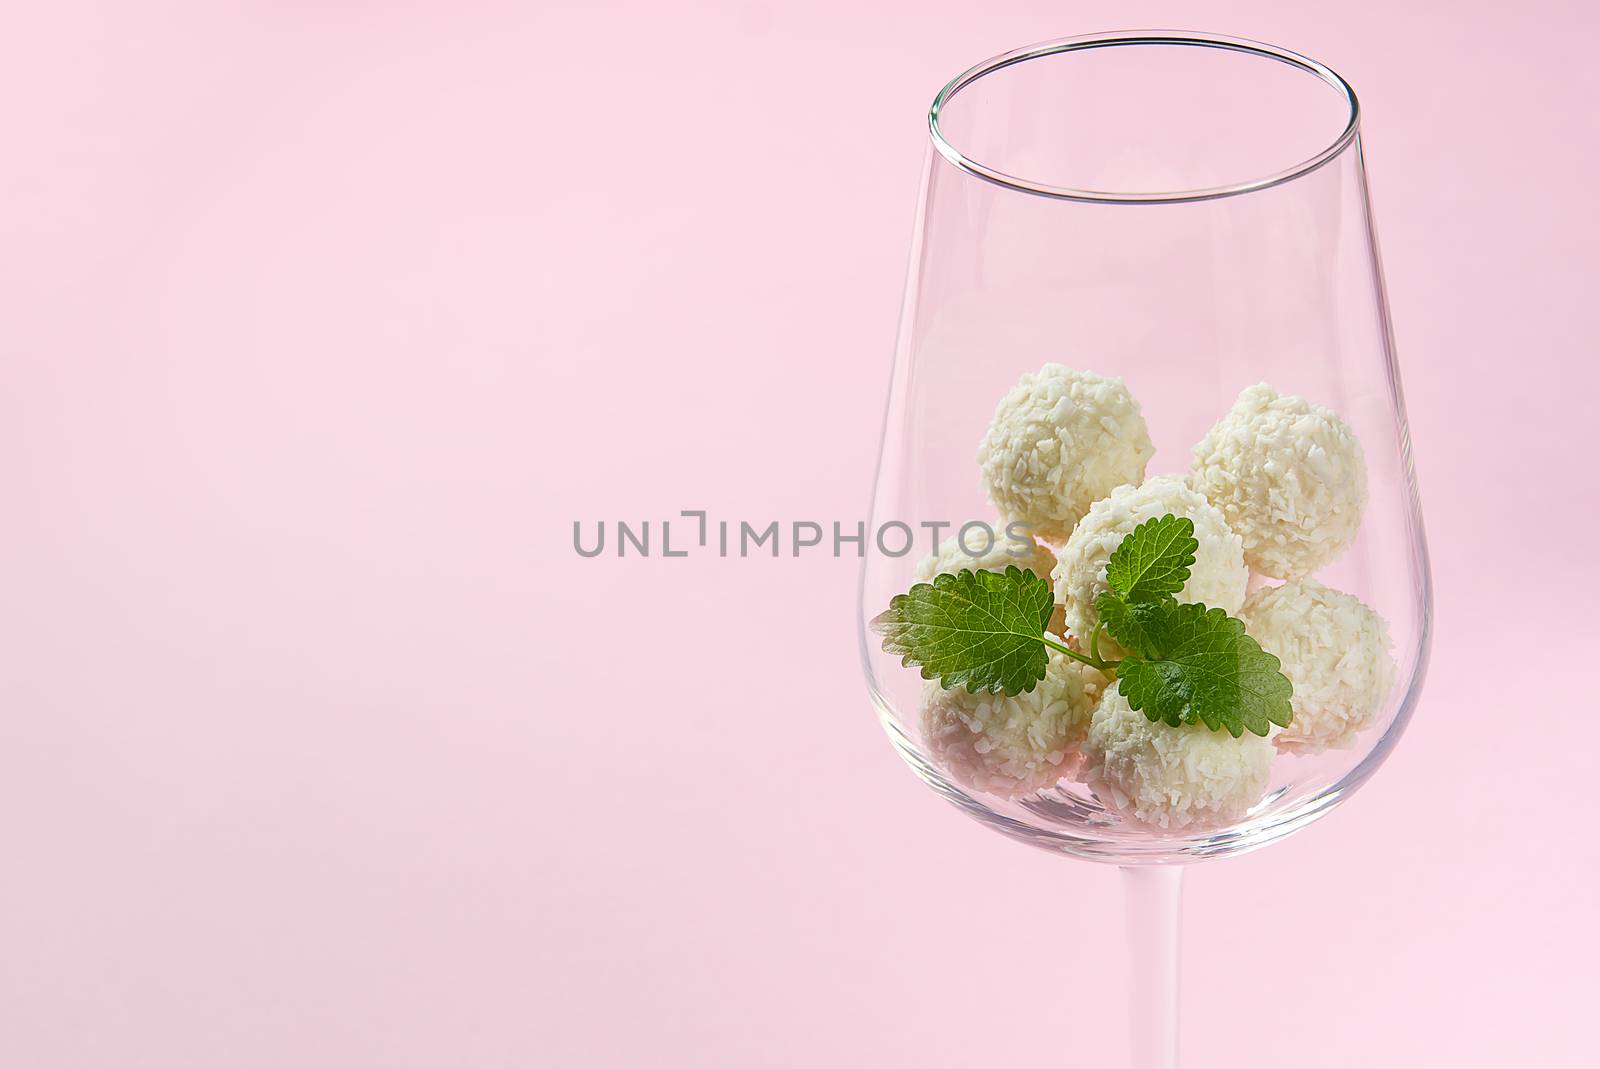 White Coconut Truffles in wine glass with mint leave. wine glass with Coconut cookies on pink background with copy space. by PhotoTime